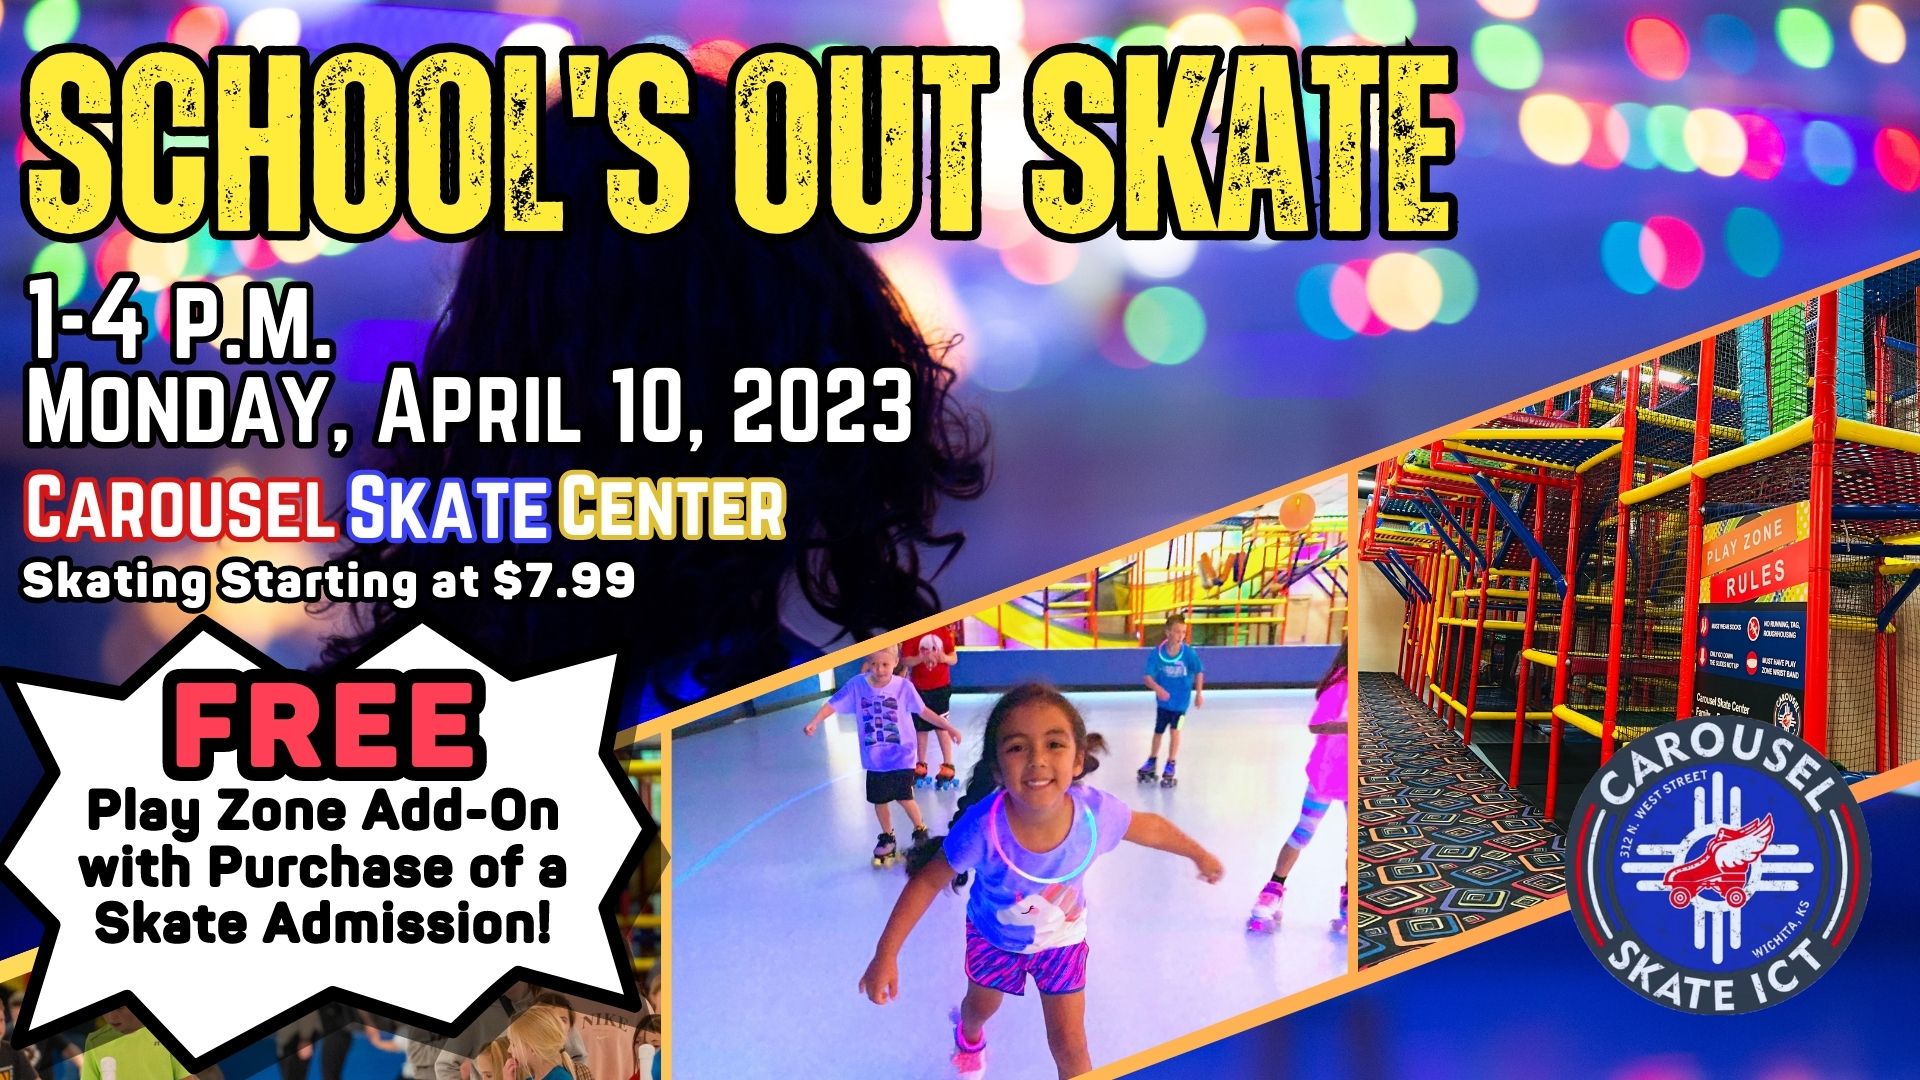 Wichita Events - Schools Out Skate at Carousel Skate